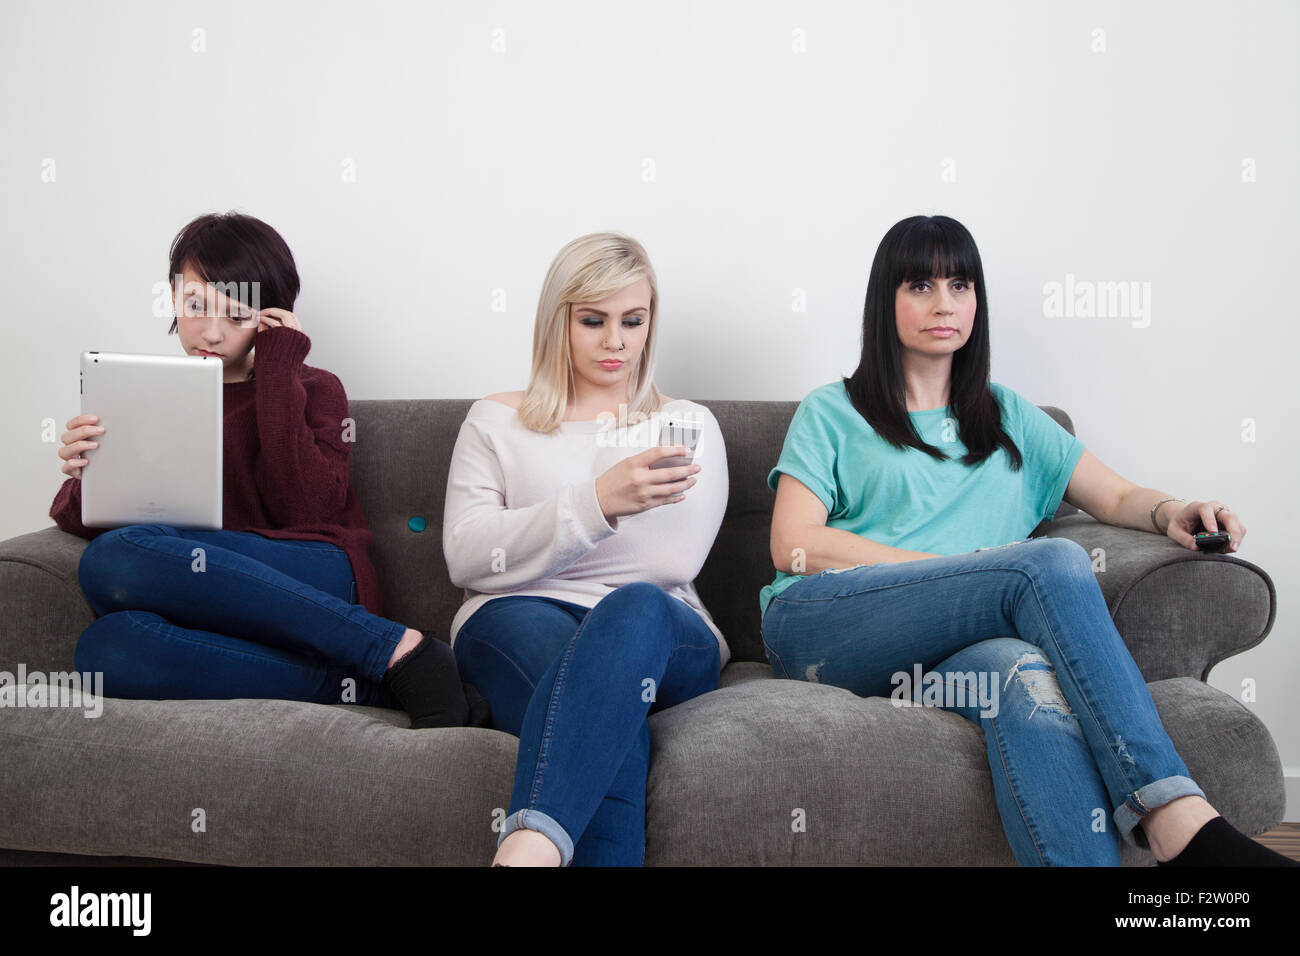 Mother and her two daughters sitting on a sofa watching TV , using an ipad and iphone. Stock Photo